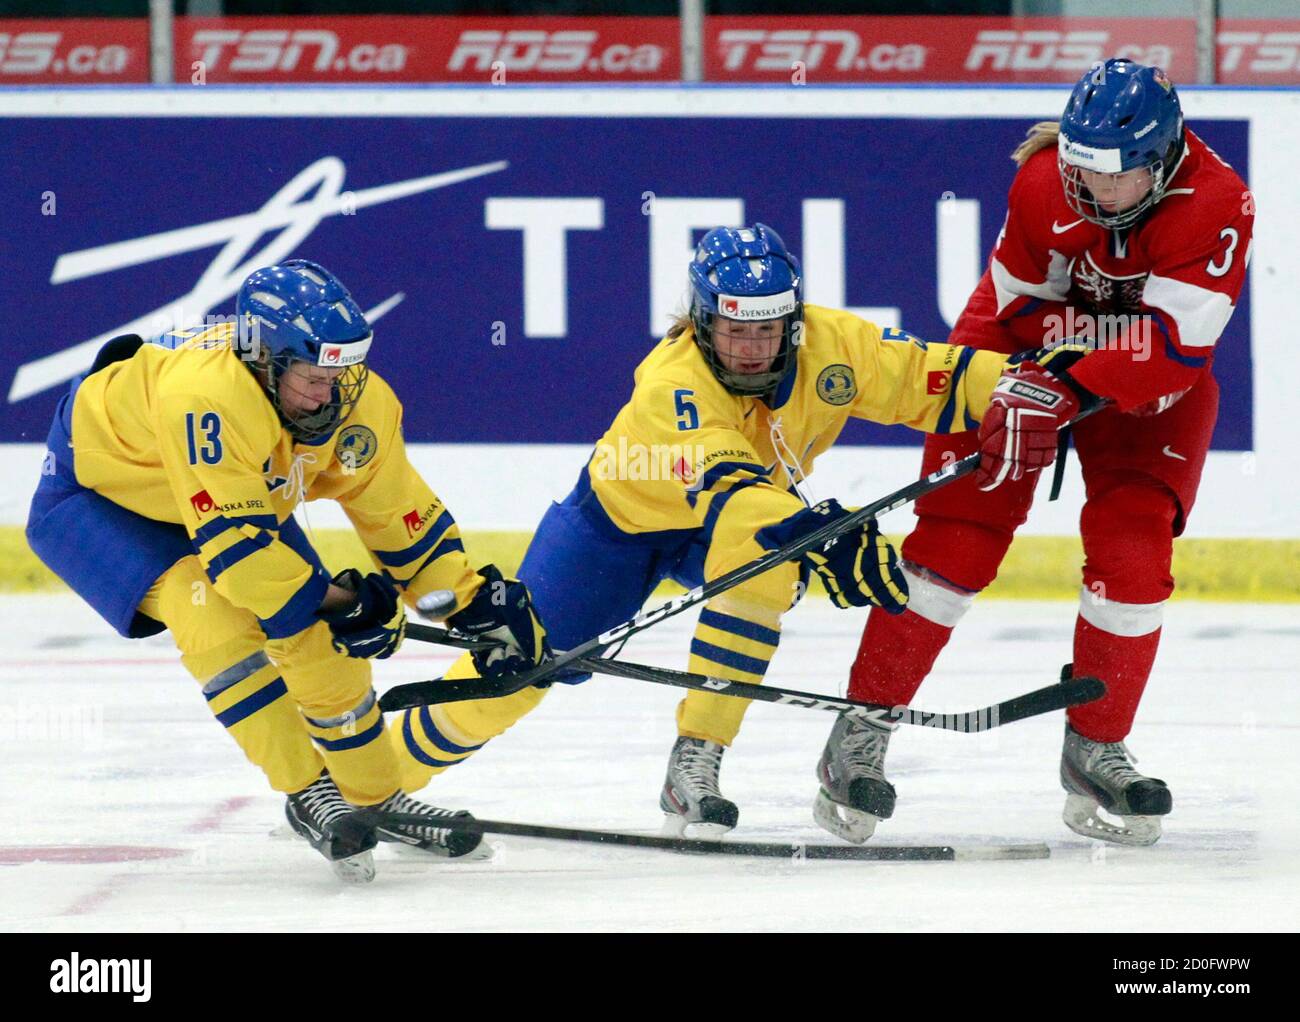 Czech Republic's Klara Chmelova (R) shoots the puck away from Sweden's Lina Wester (L) and Johanna Fallman during the third period of their preliminary round game at the IIHF Ice Hockey Women's World Championship in Ottawa April 2, 2013.     REUTERS/Blair Gable     (CANADA - Tags: SPORT ICE HOCKEY) Stock Photo